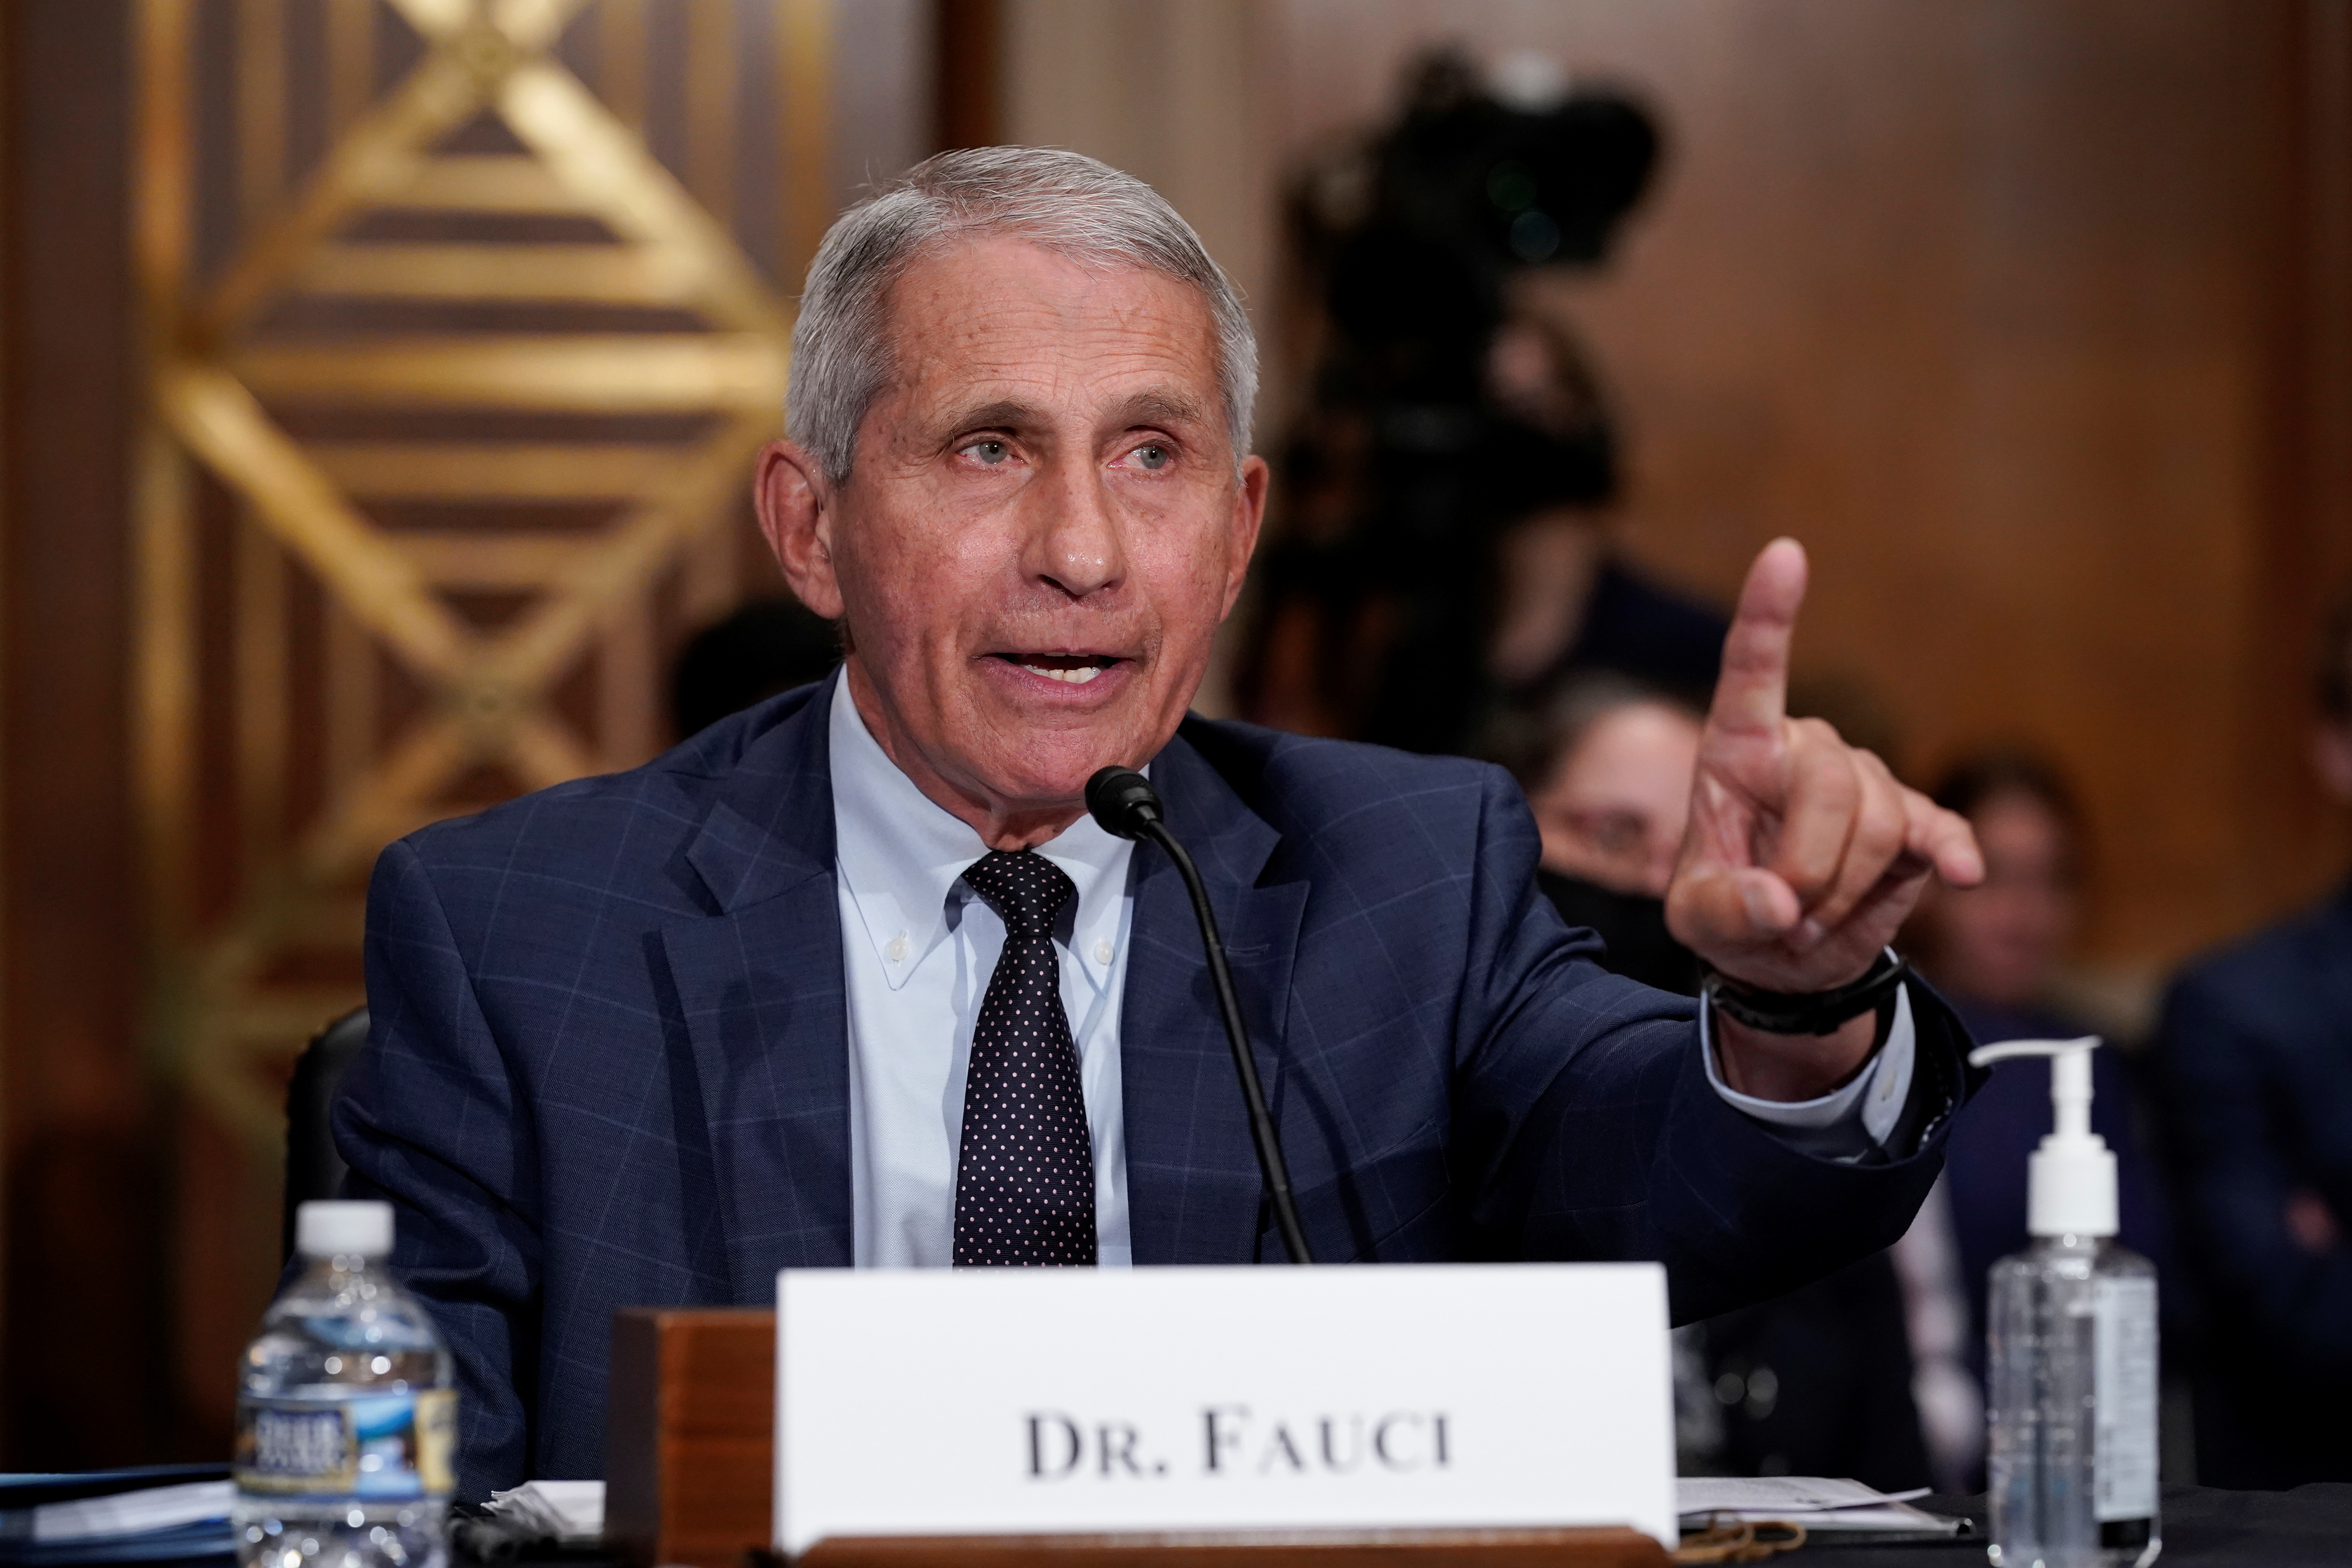 Top infectious disease expert Dr. Anthony Fauci responds to accusations by Sen. Rand Paul (R-KY) as he testifies before the Senate Health, Education, Labor, and Pensions Committee on Capitol hill in Washington, D.C., U.S., July 20, 2021.  J. Scott Applewhite/Pool via REUTERS